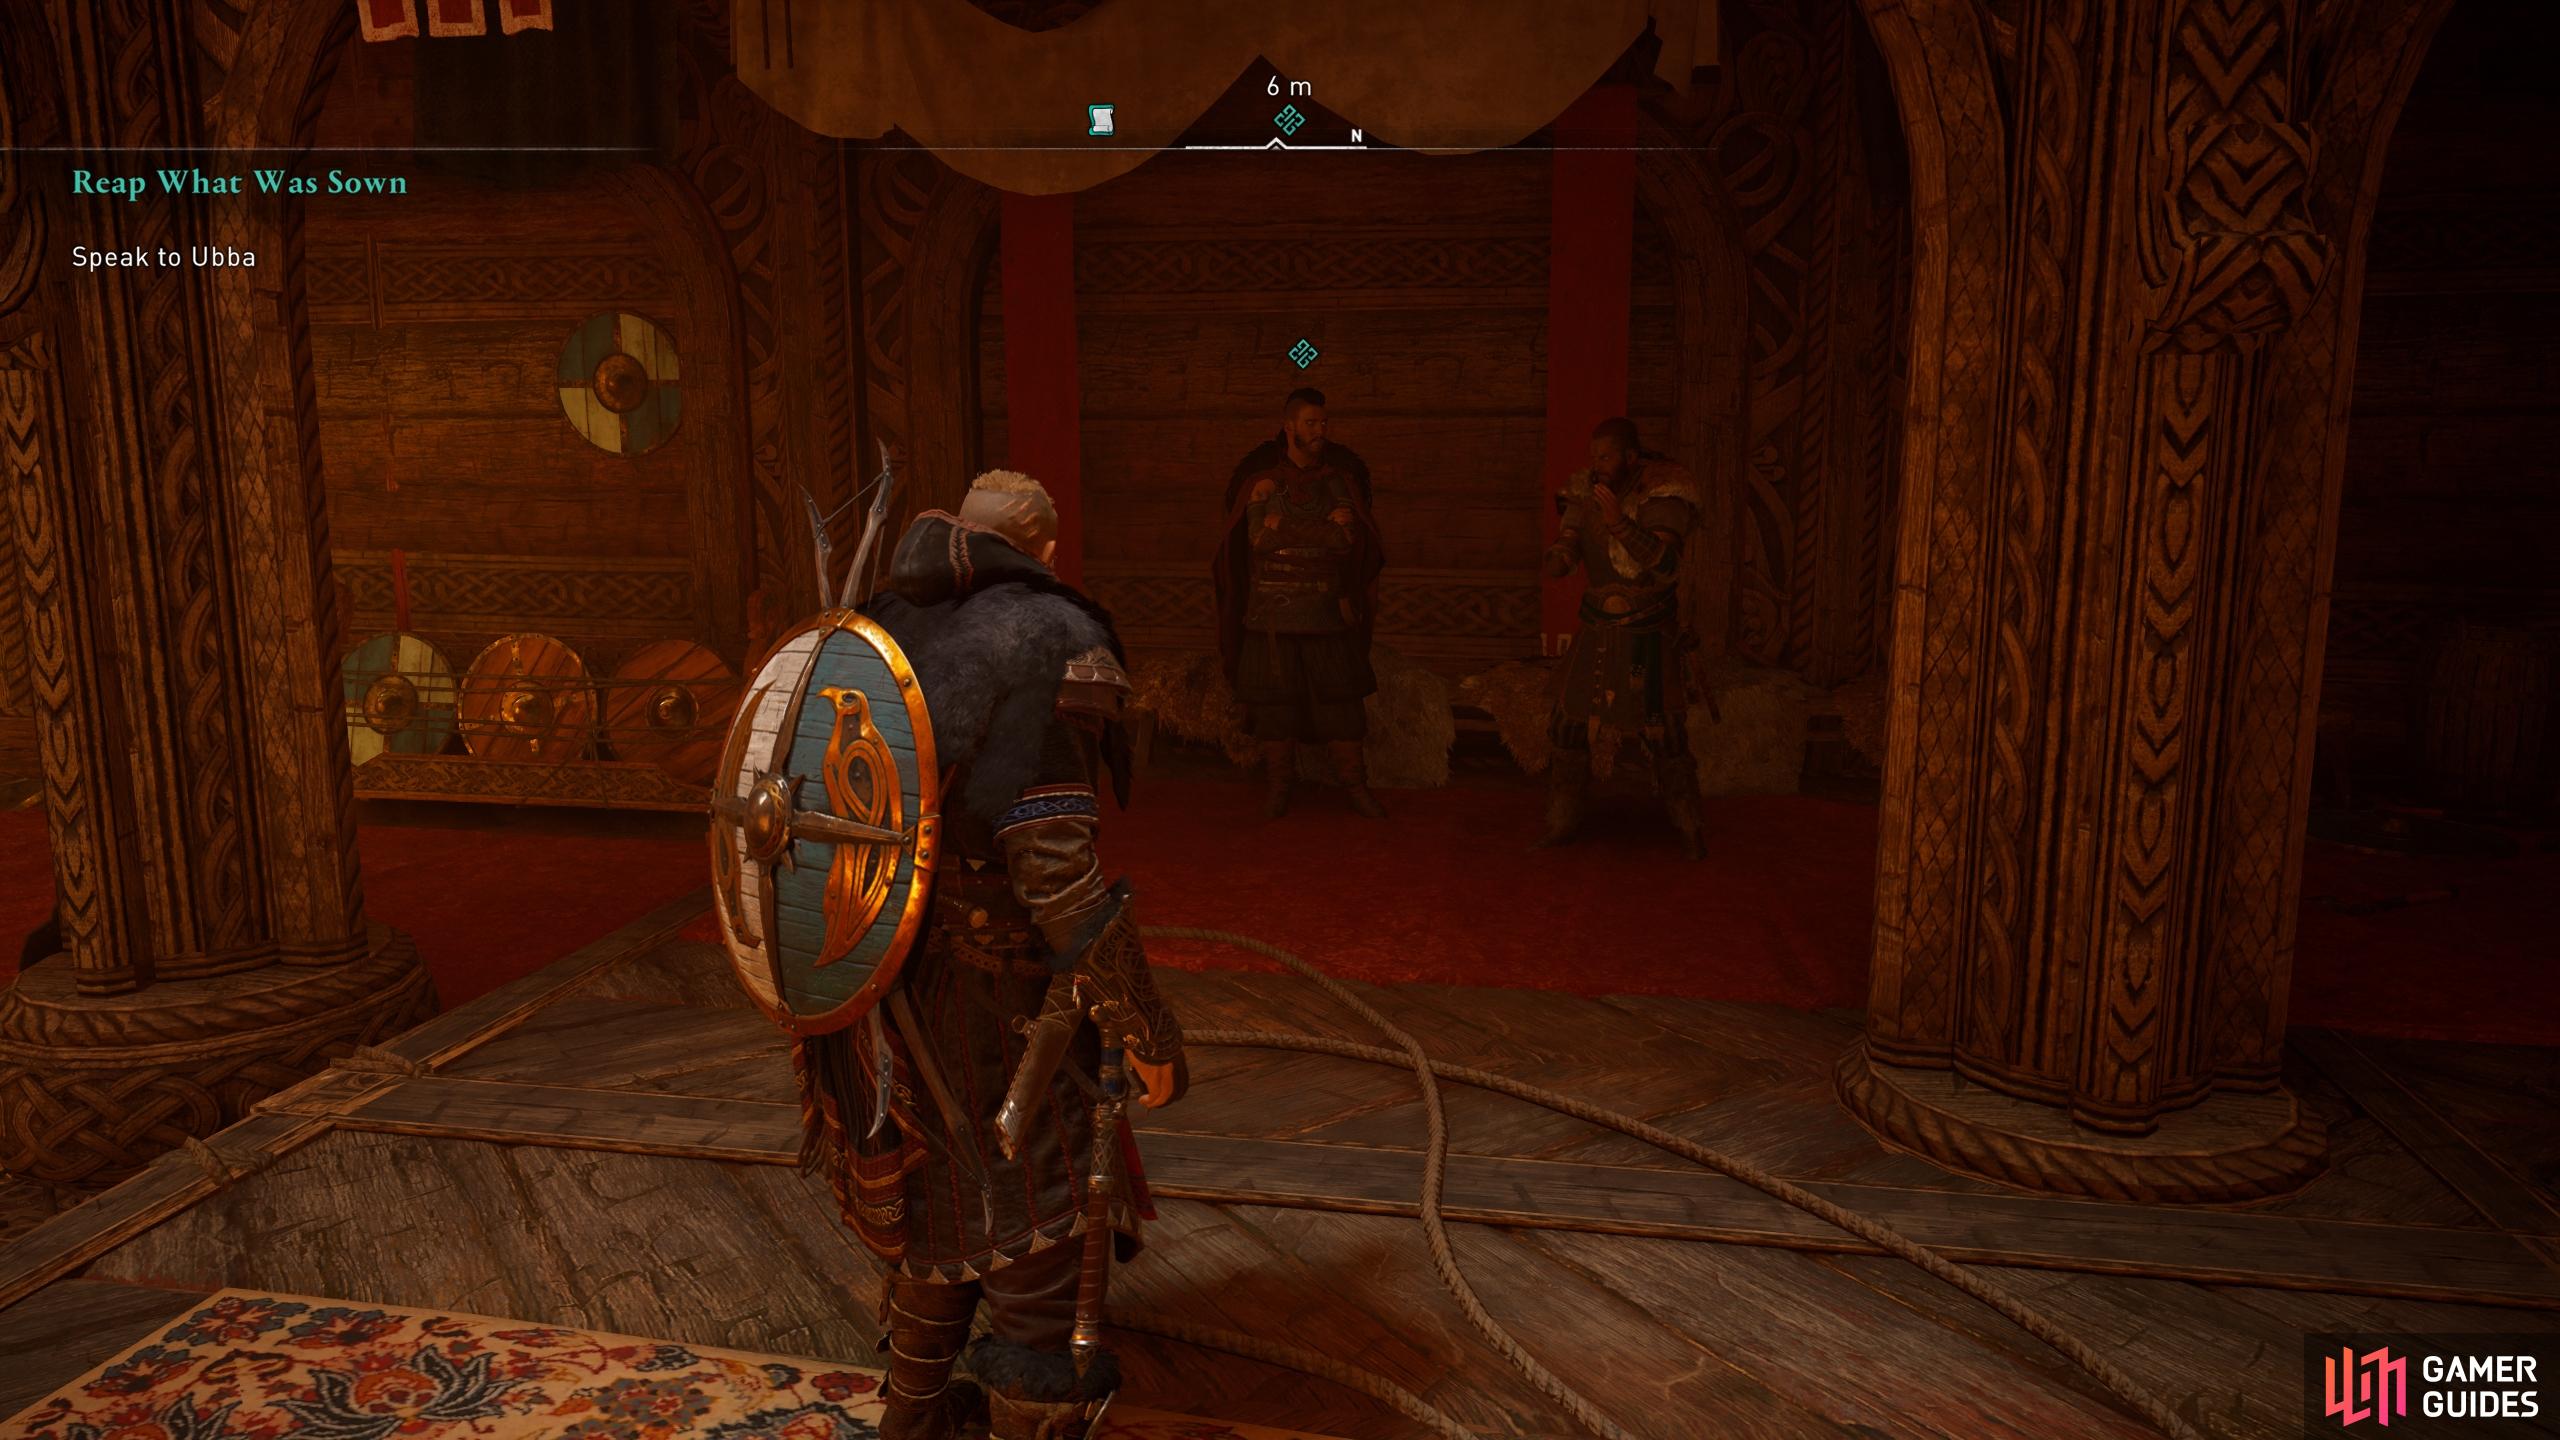 Speak with Ubba in the longhouse to begin a cutscene.